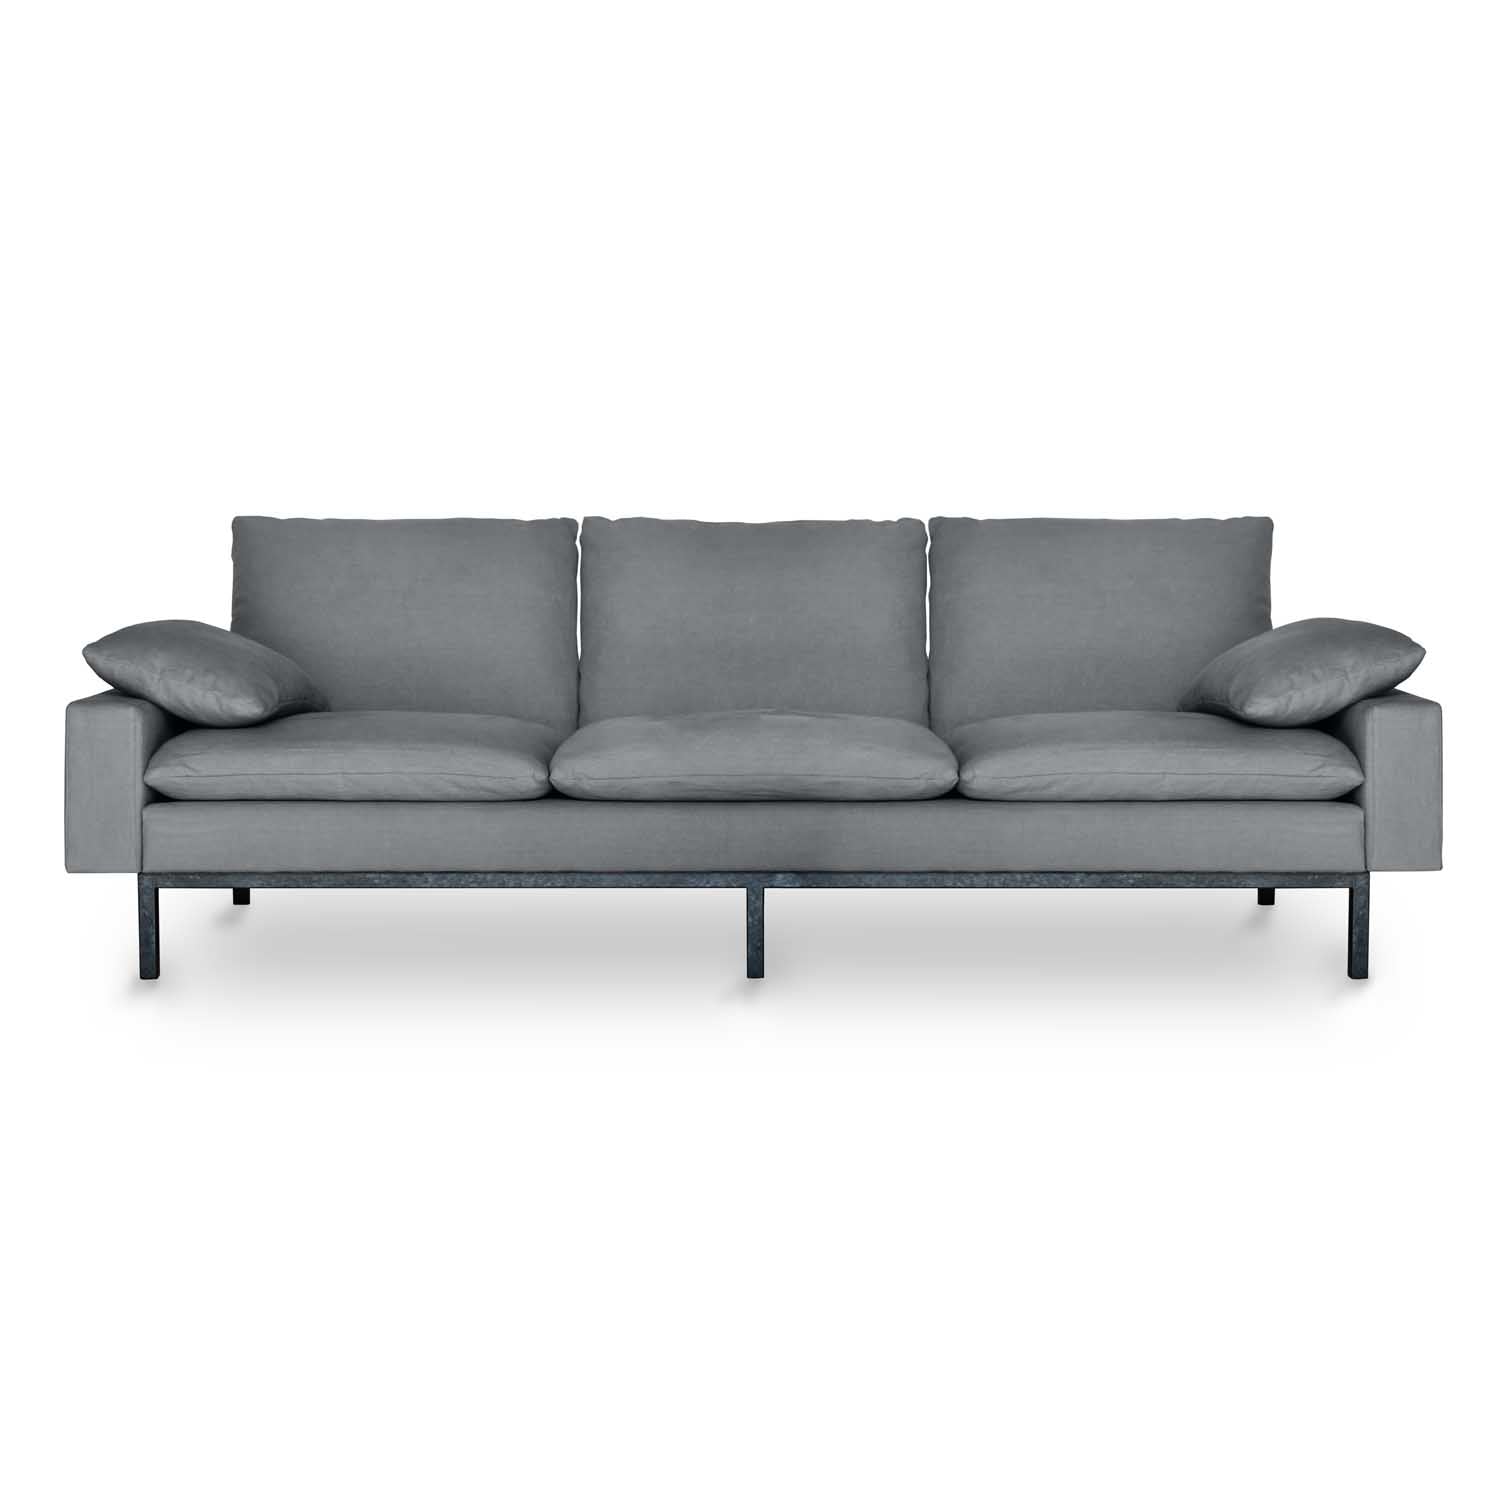 Regulated Back Cushions for Your Comfort. grey sustainable family sofa.